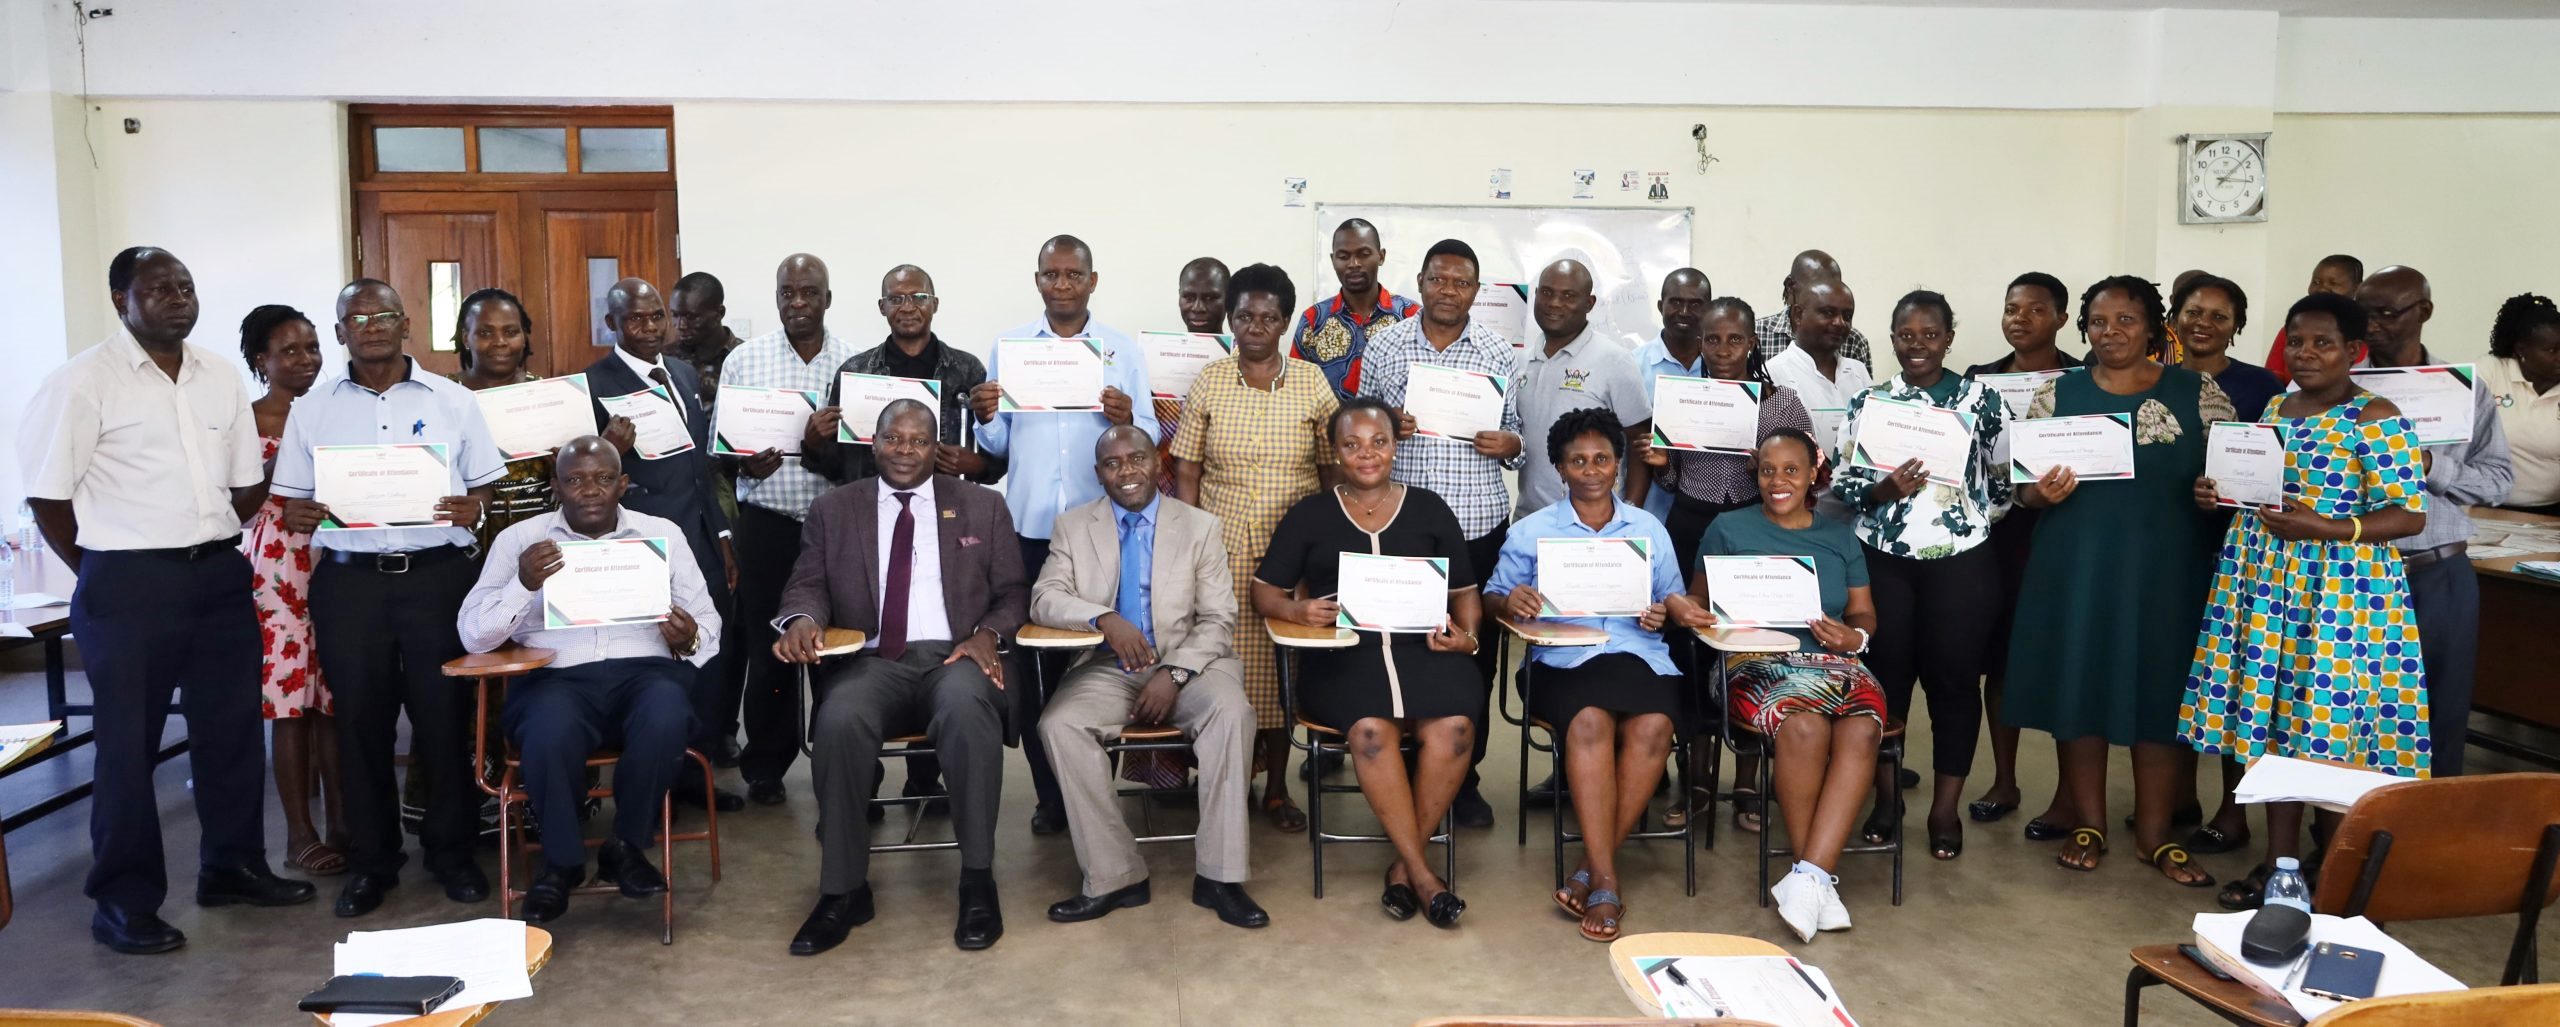 Ag. Director, Directorate of Human Resources, Mr. Lawrence Sanyu (Seated 3rd Left), Principal CoCIS, Prof. Tonny Oyana (Seated 2nd Left) with participants after the training on 12th May 2023. Makerere University, Kampala Uganda.